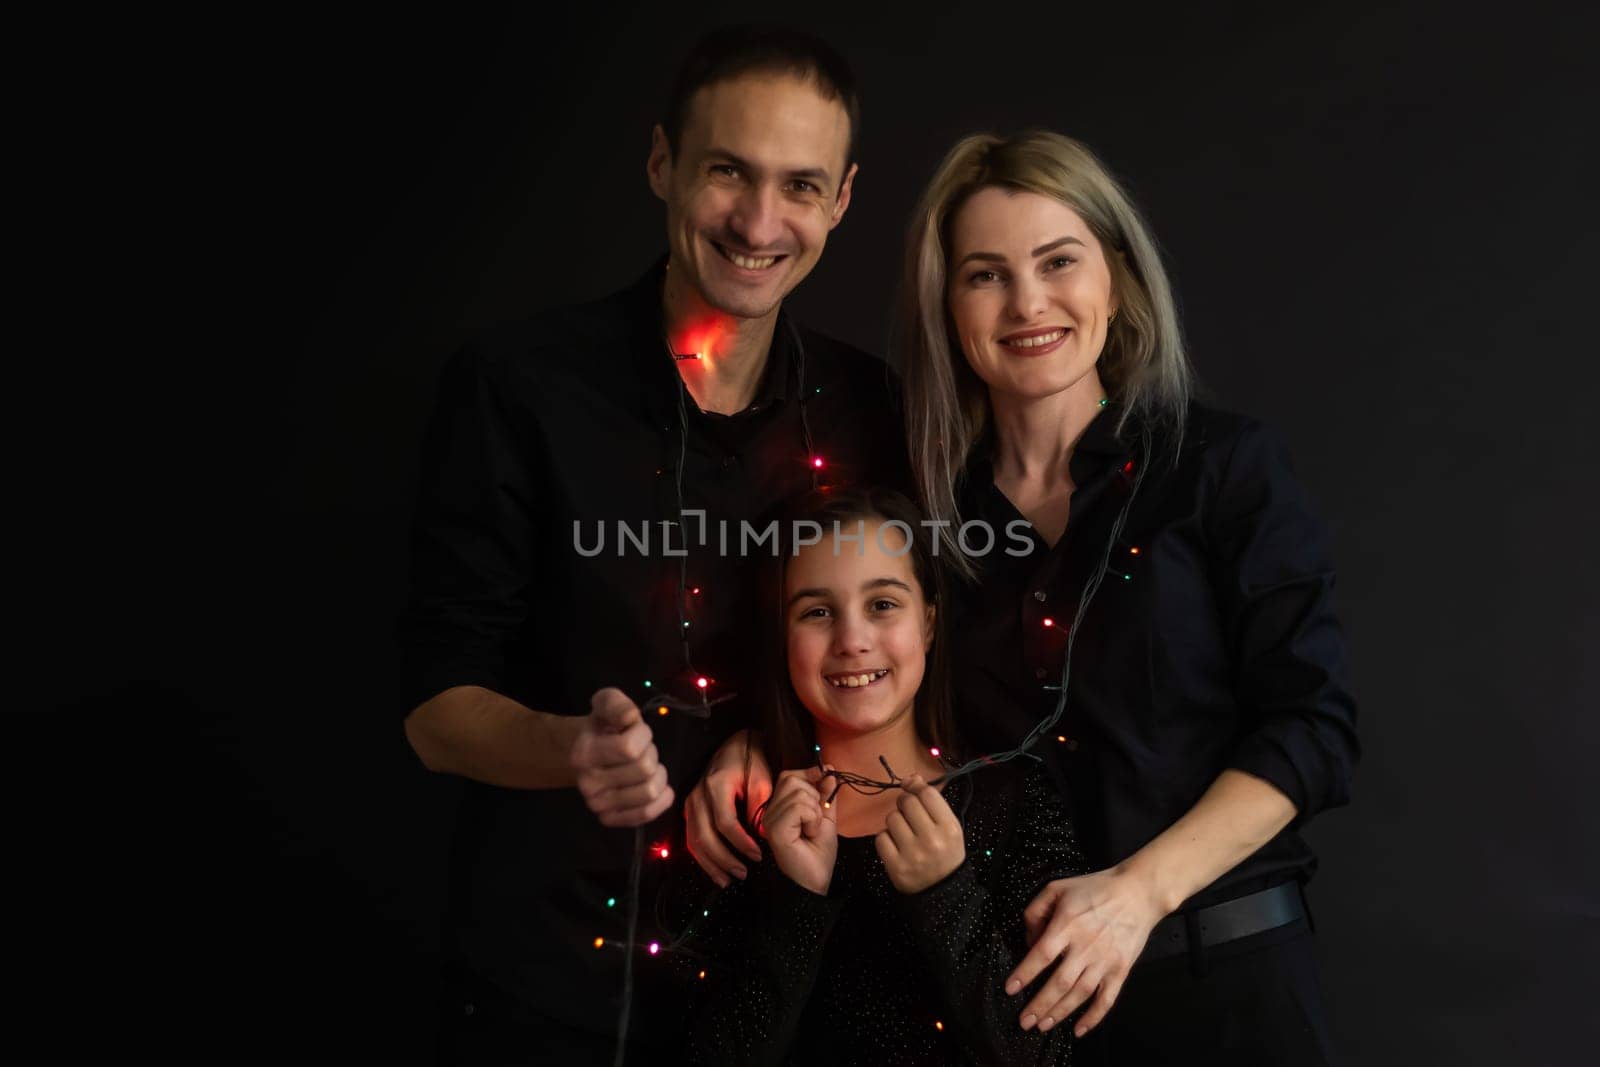 family with garland on a black background by Andelov13